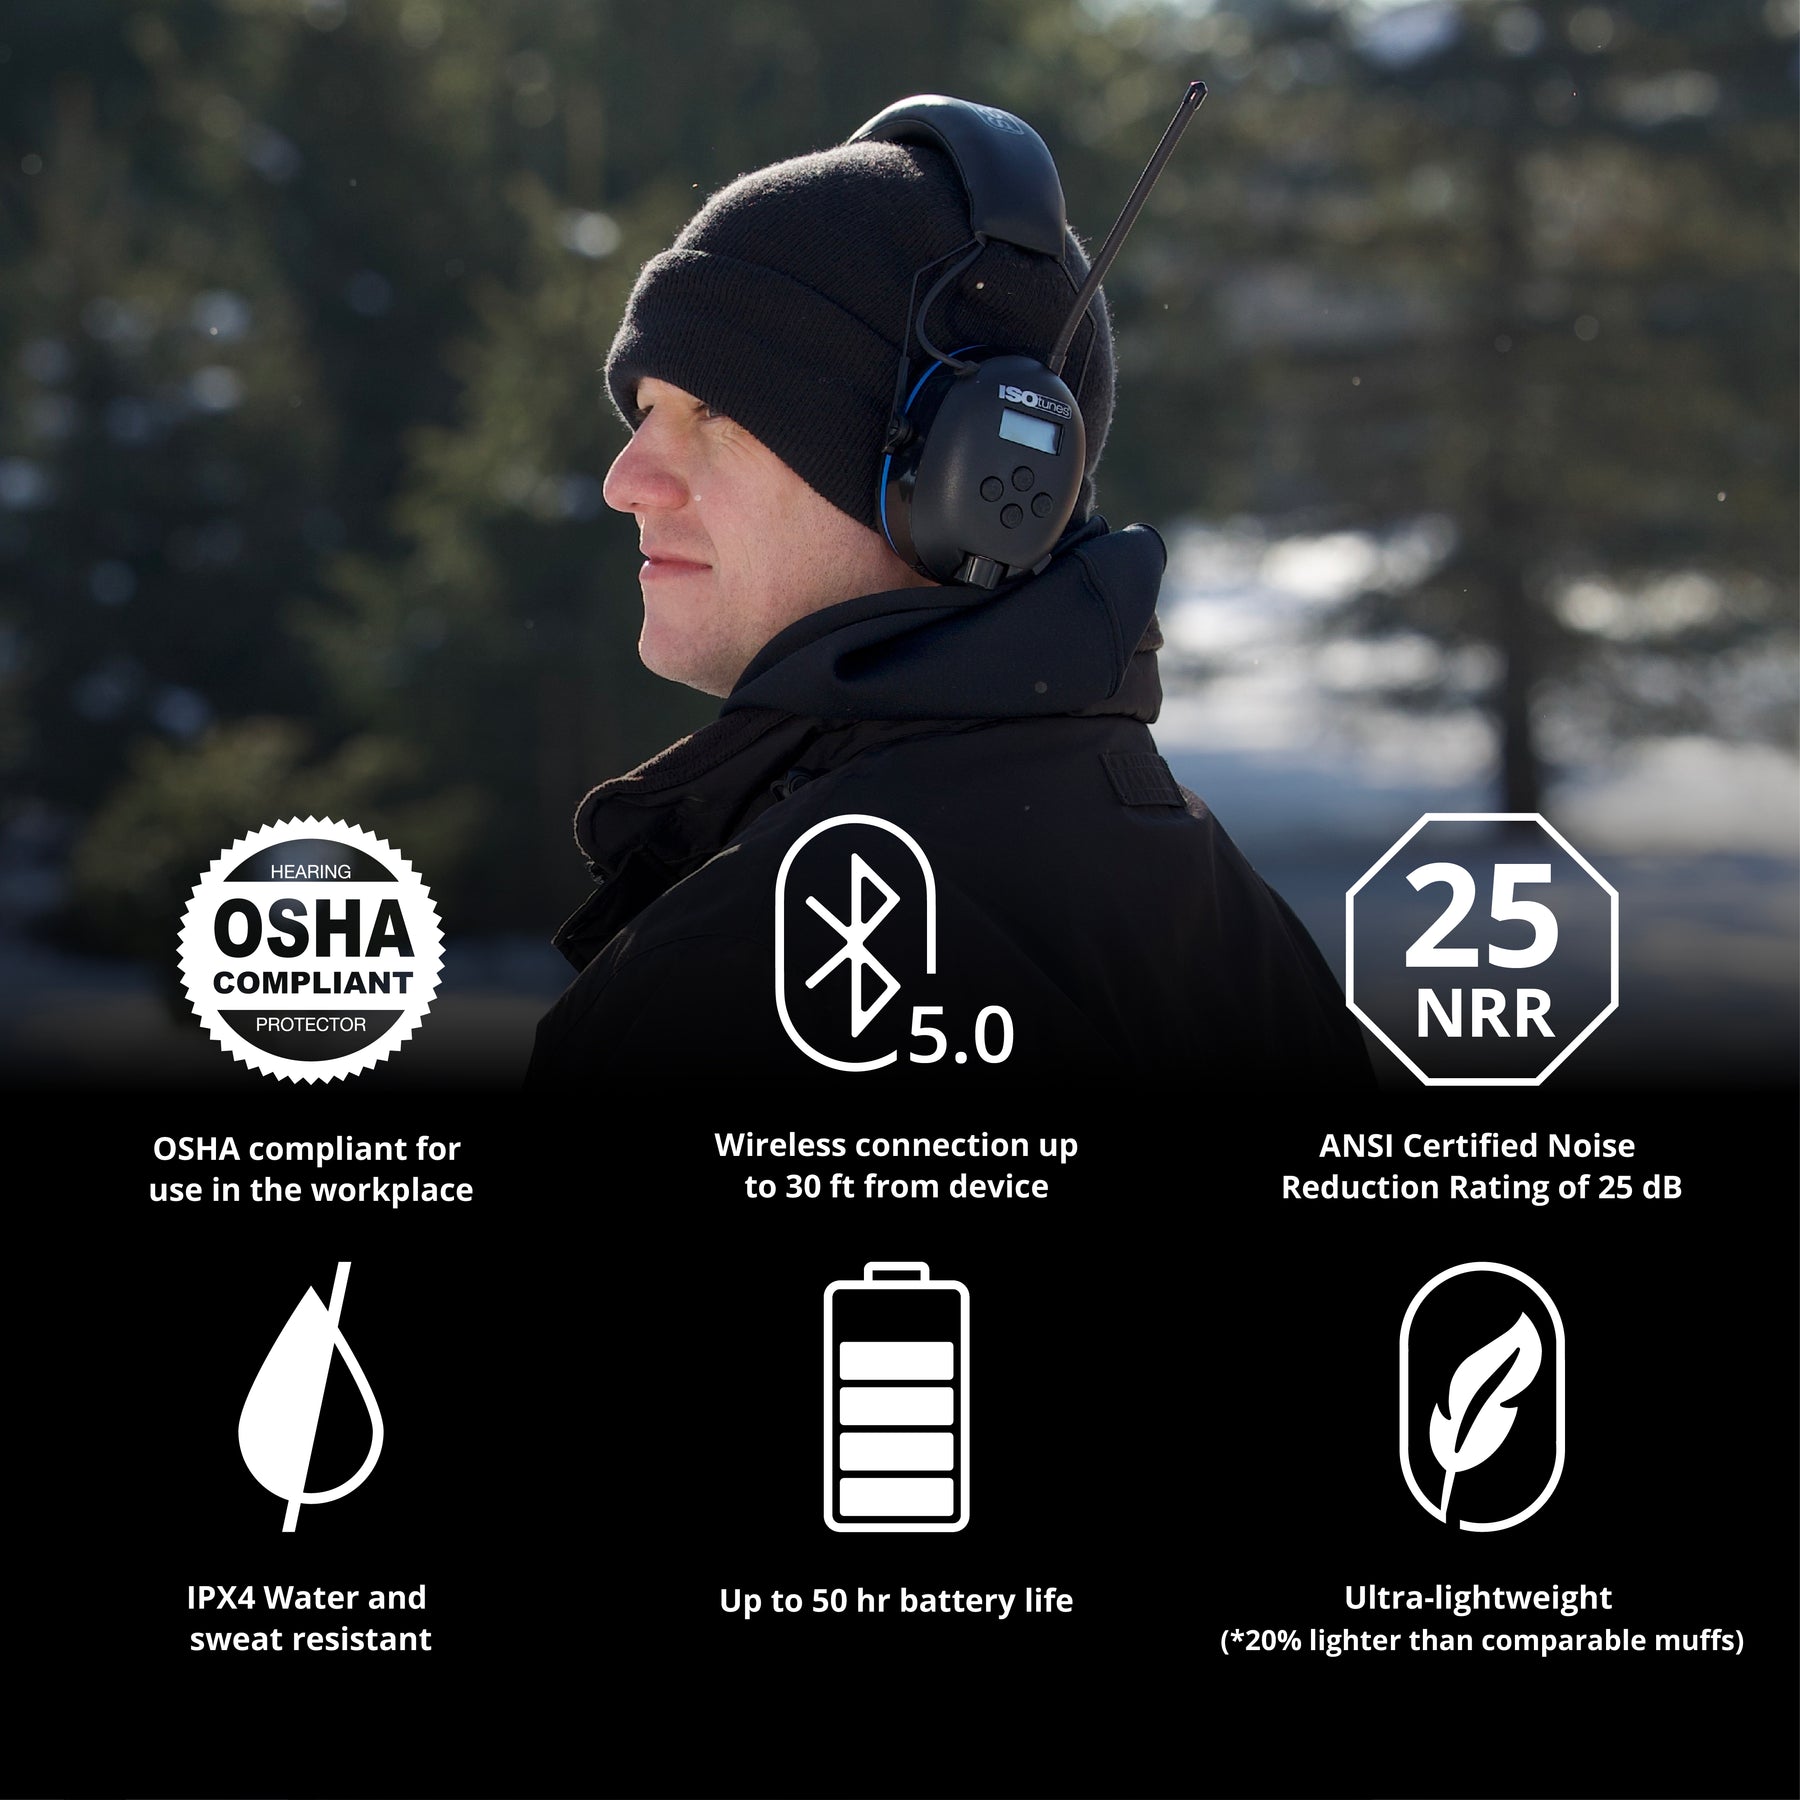 ISOtunes AIR DEFENDER AMFM BT Headphones for Hearing Protection Features Highlights